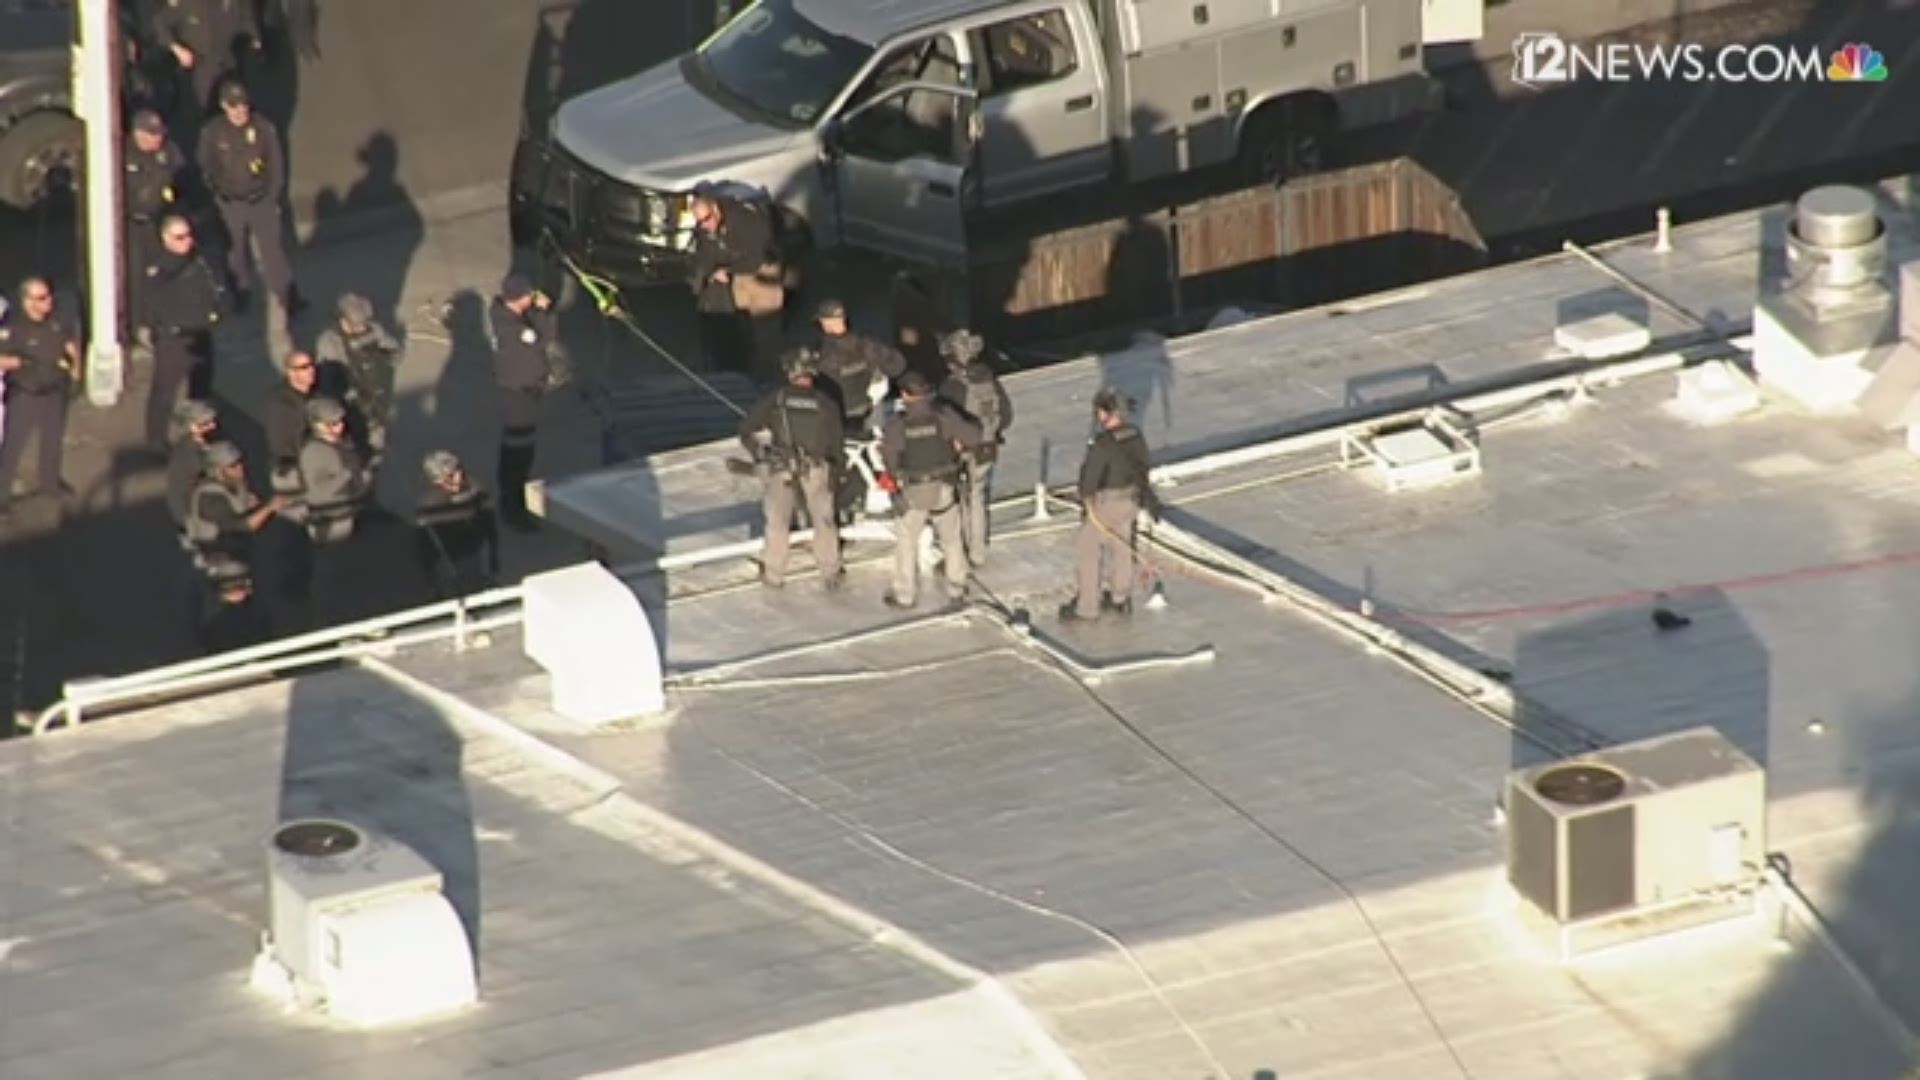 The Phoenix Police SWAT team rushed to the scene, and video shows over a dozen officers lowering the suspect from the roof of a building.